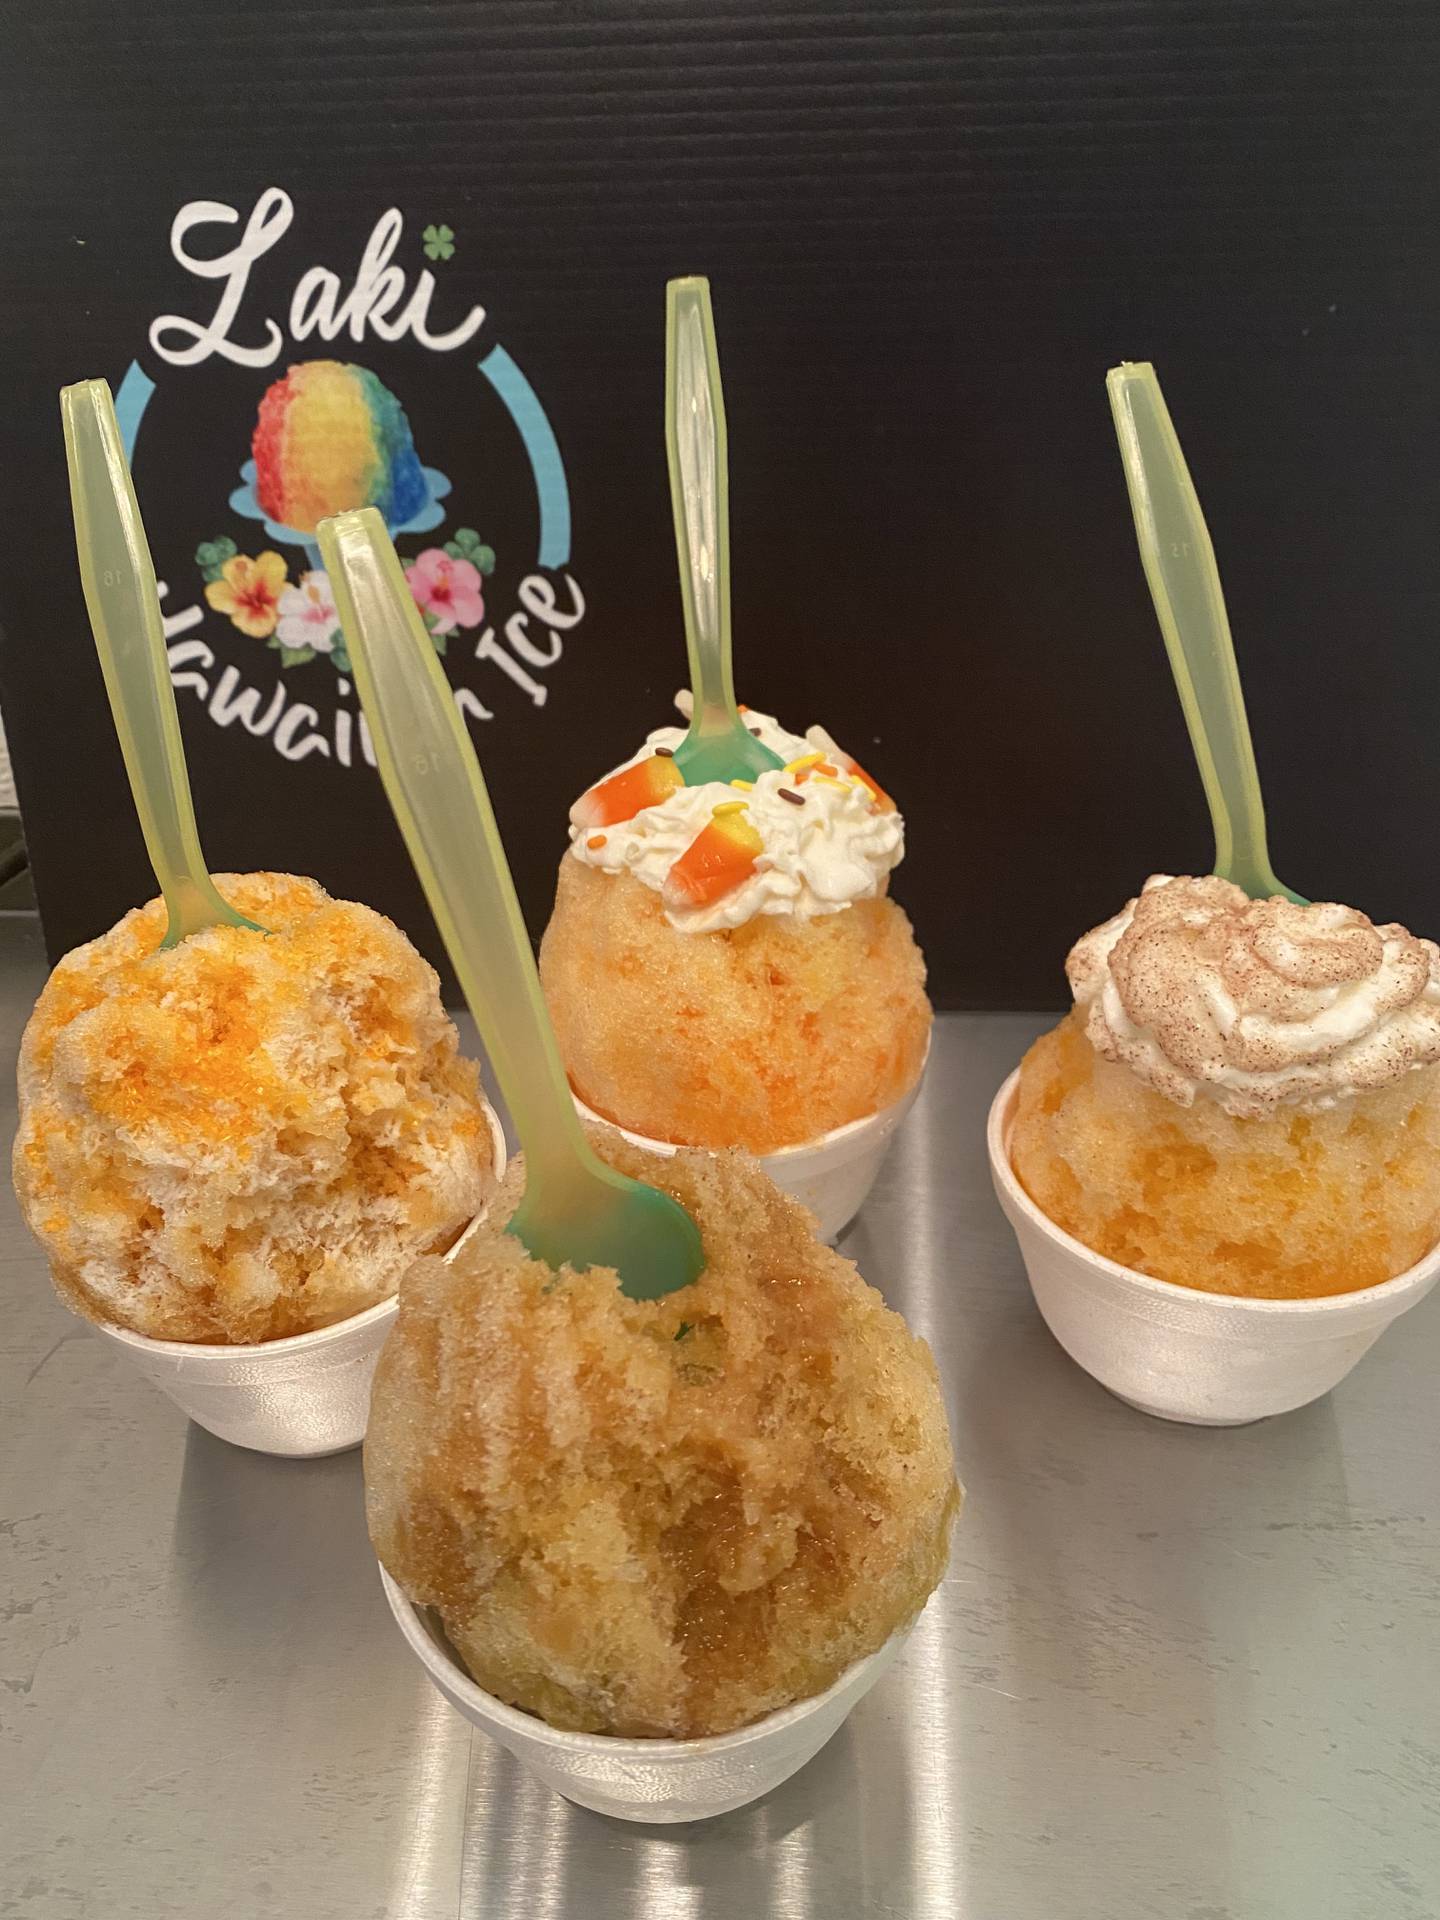 The shop offers over 50 specialty Hawaiian ice flavors ranging from banana, and kiwi to cookie dough, along with ten flavors of homemade cotton candy ranging from grape and watermelon to pina colada.